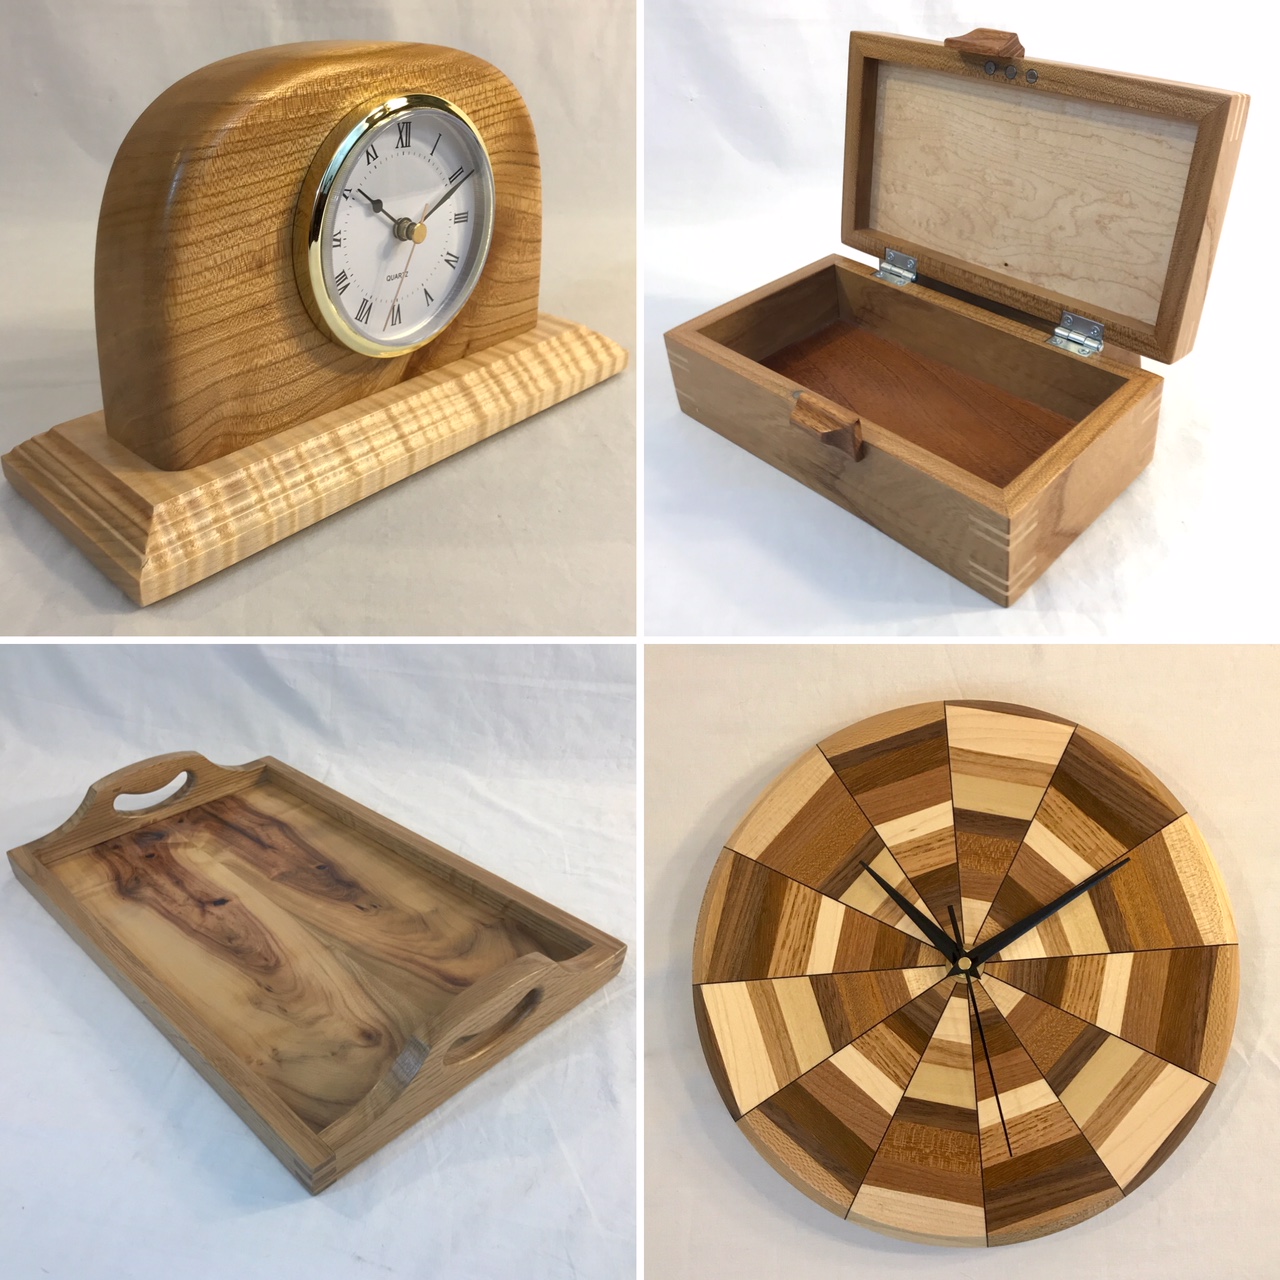 Ross Peters Woodworking